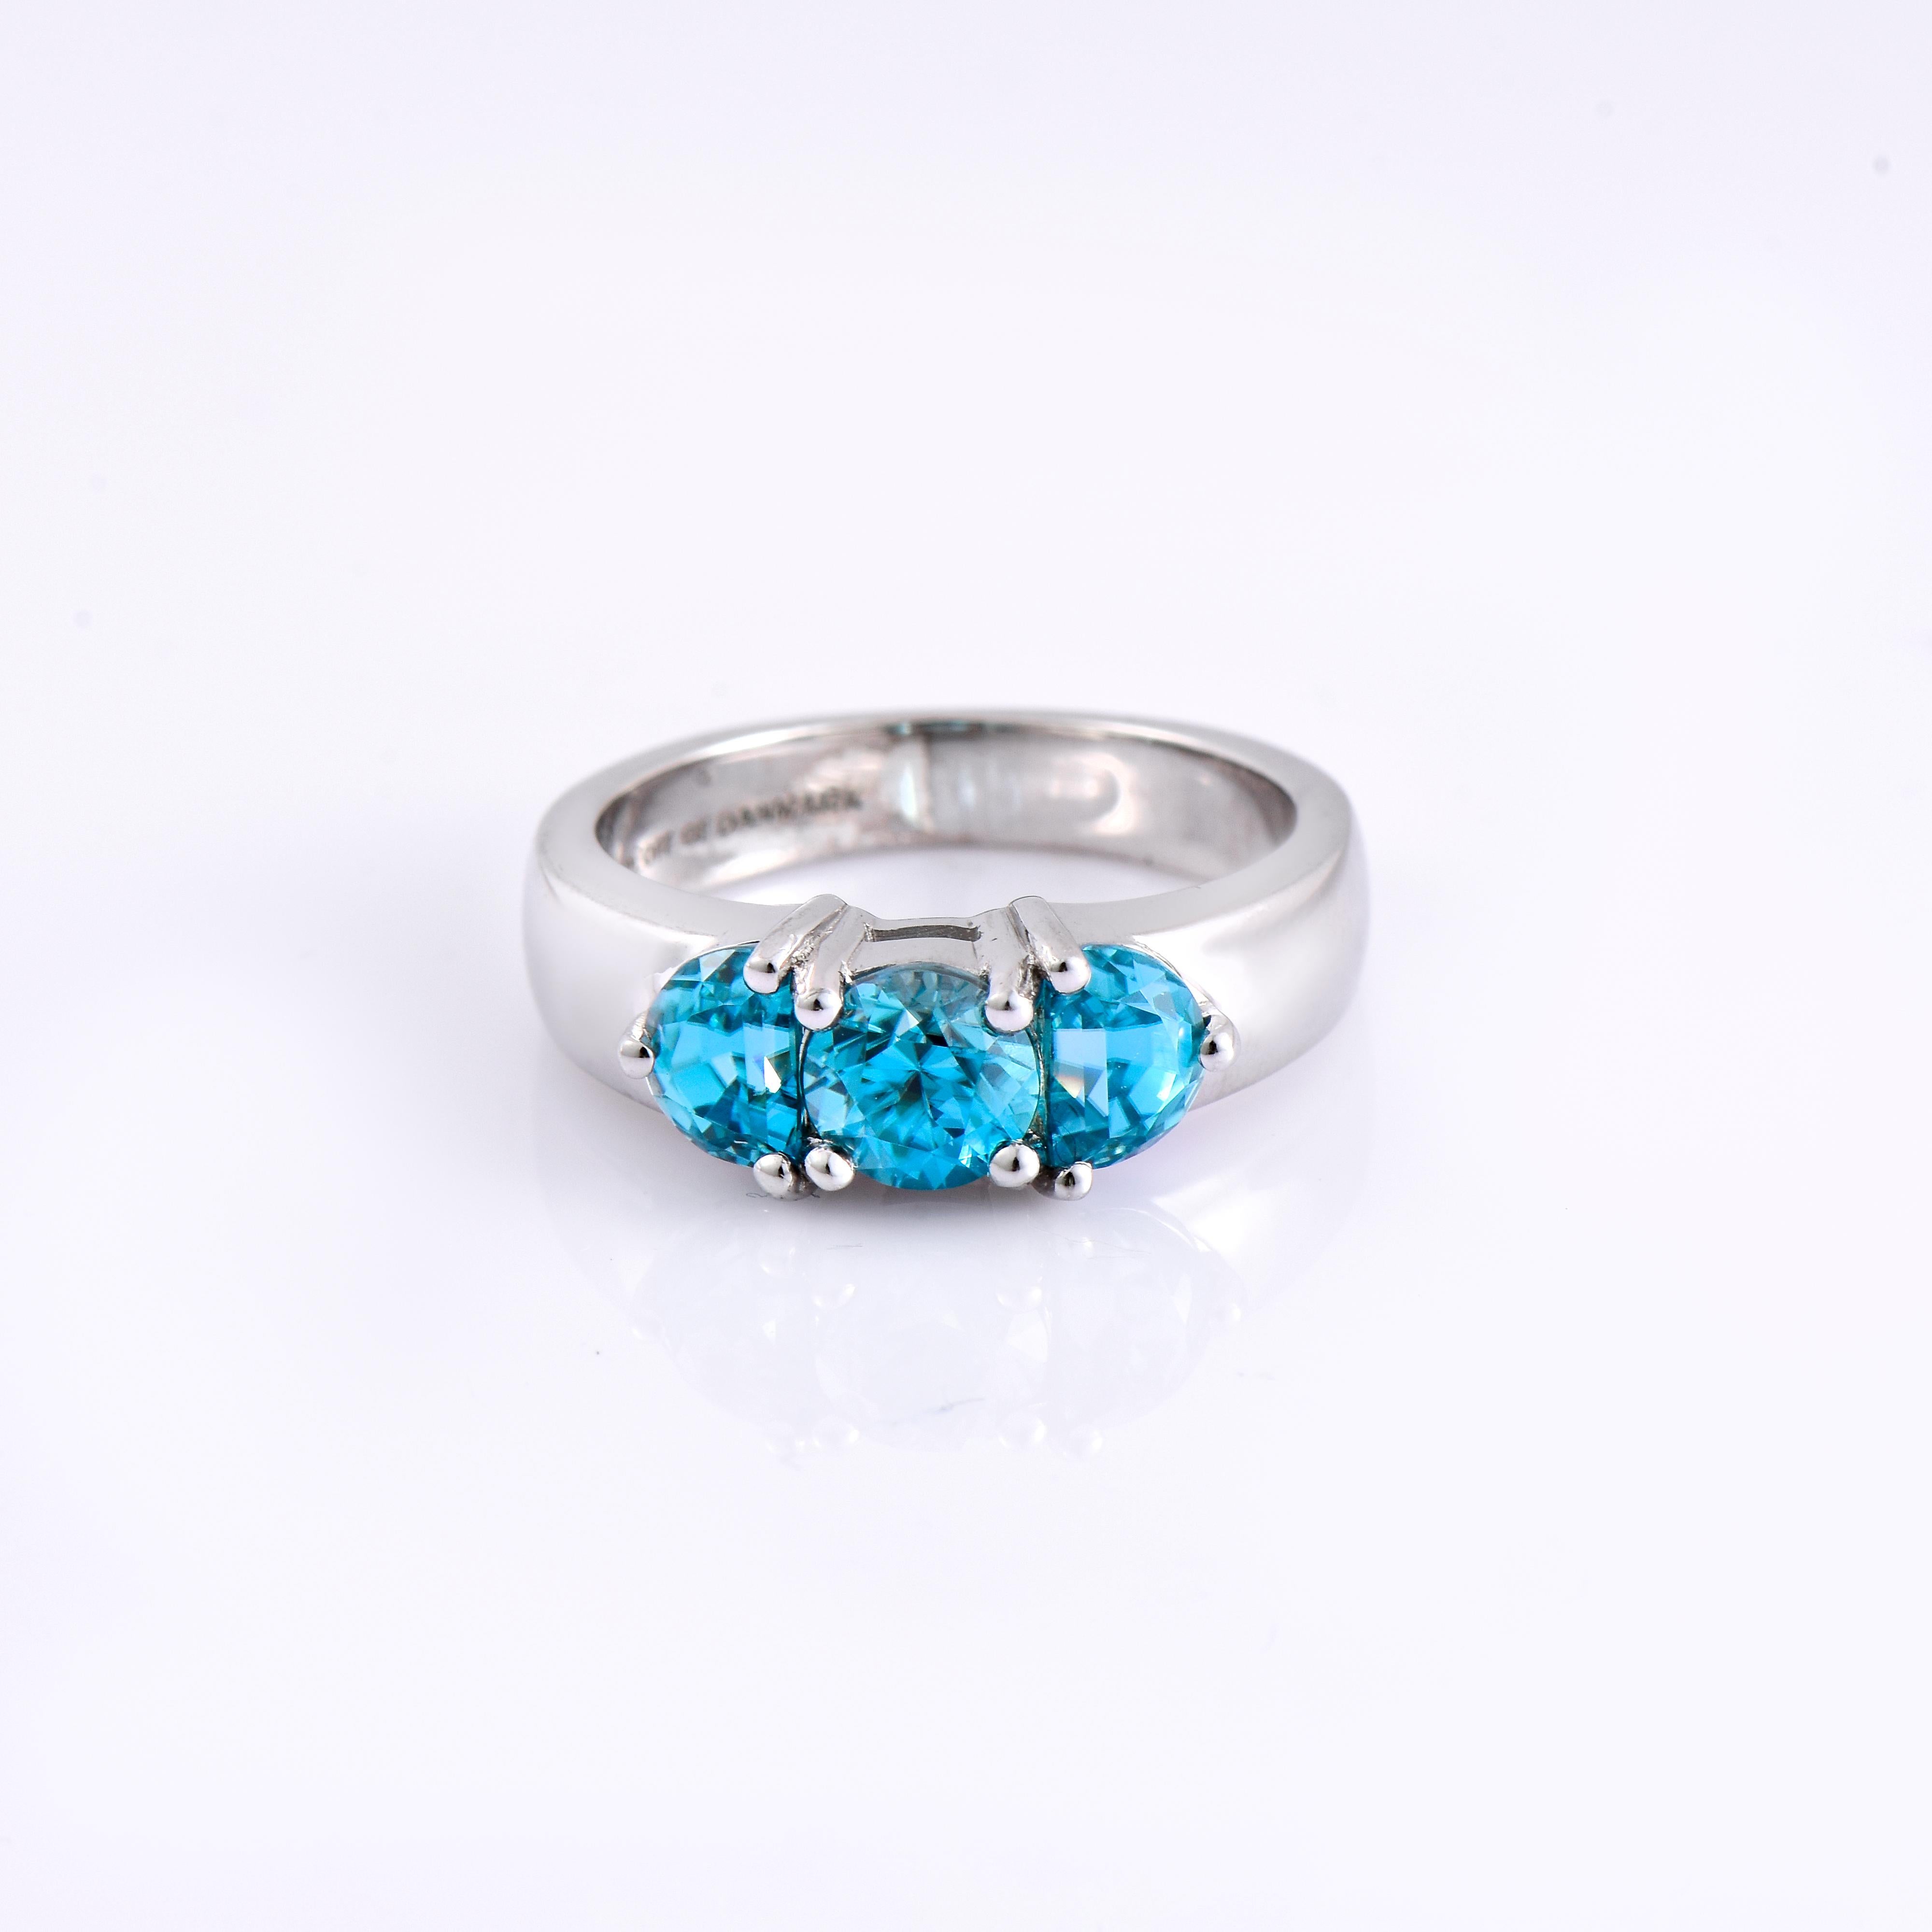 Orloff of Denmark; 925 Sterling Silver Ring set with three Natural Cambodian Blue Zircons totaling to 3.41 carats.

This piece has been meticulously hand-crafted out of 925 sterling silver.
In the center sits a fantastic 2.07 carat blue zircon